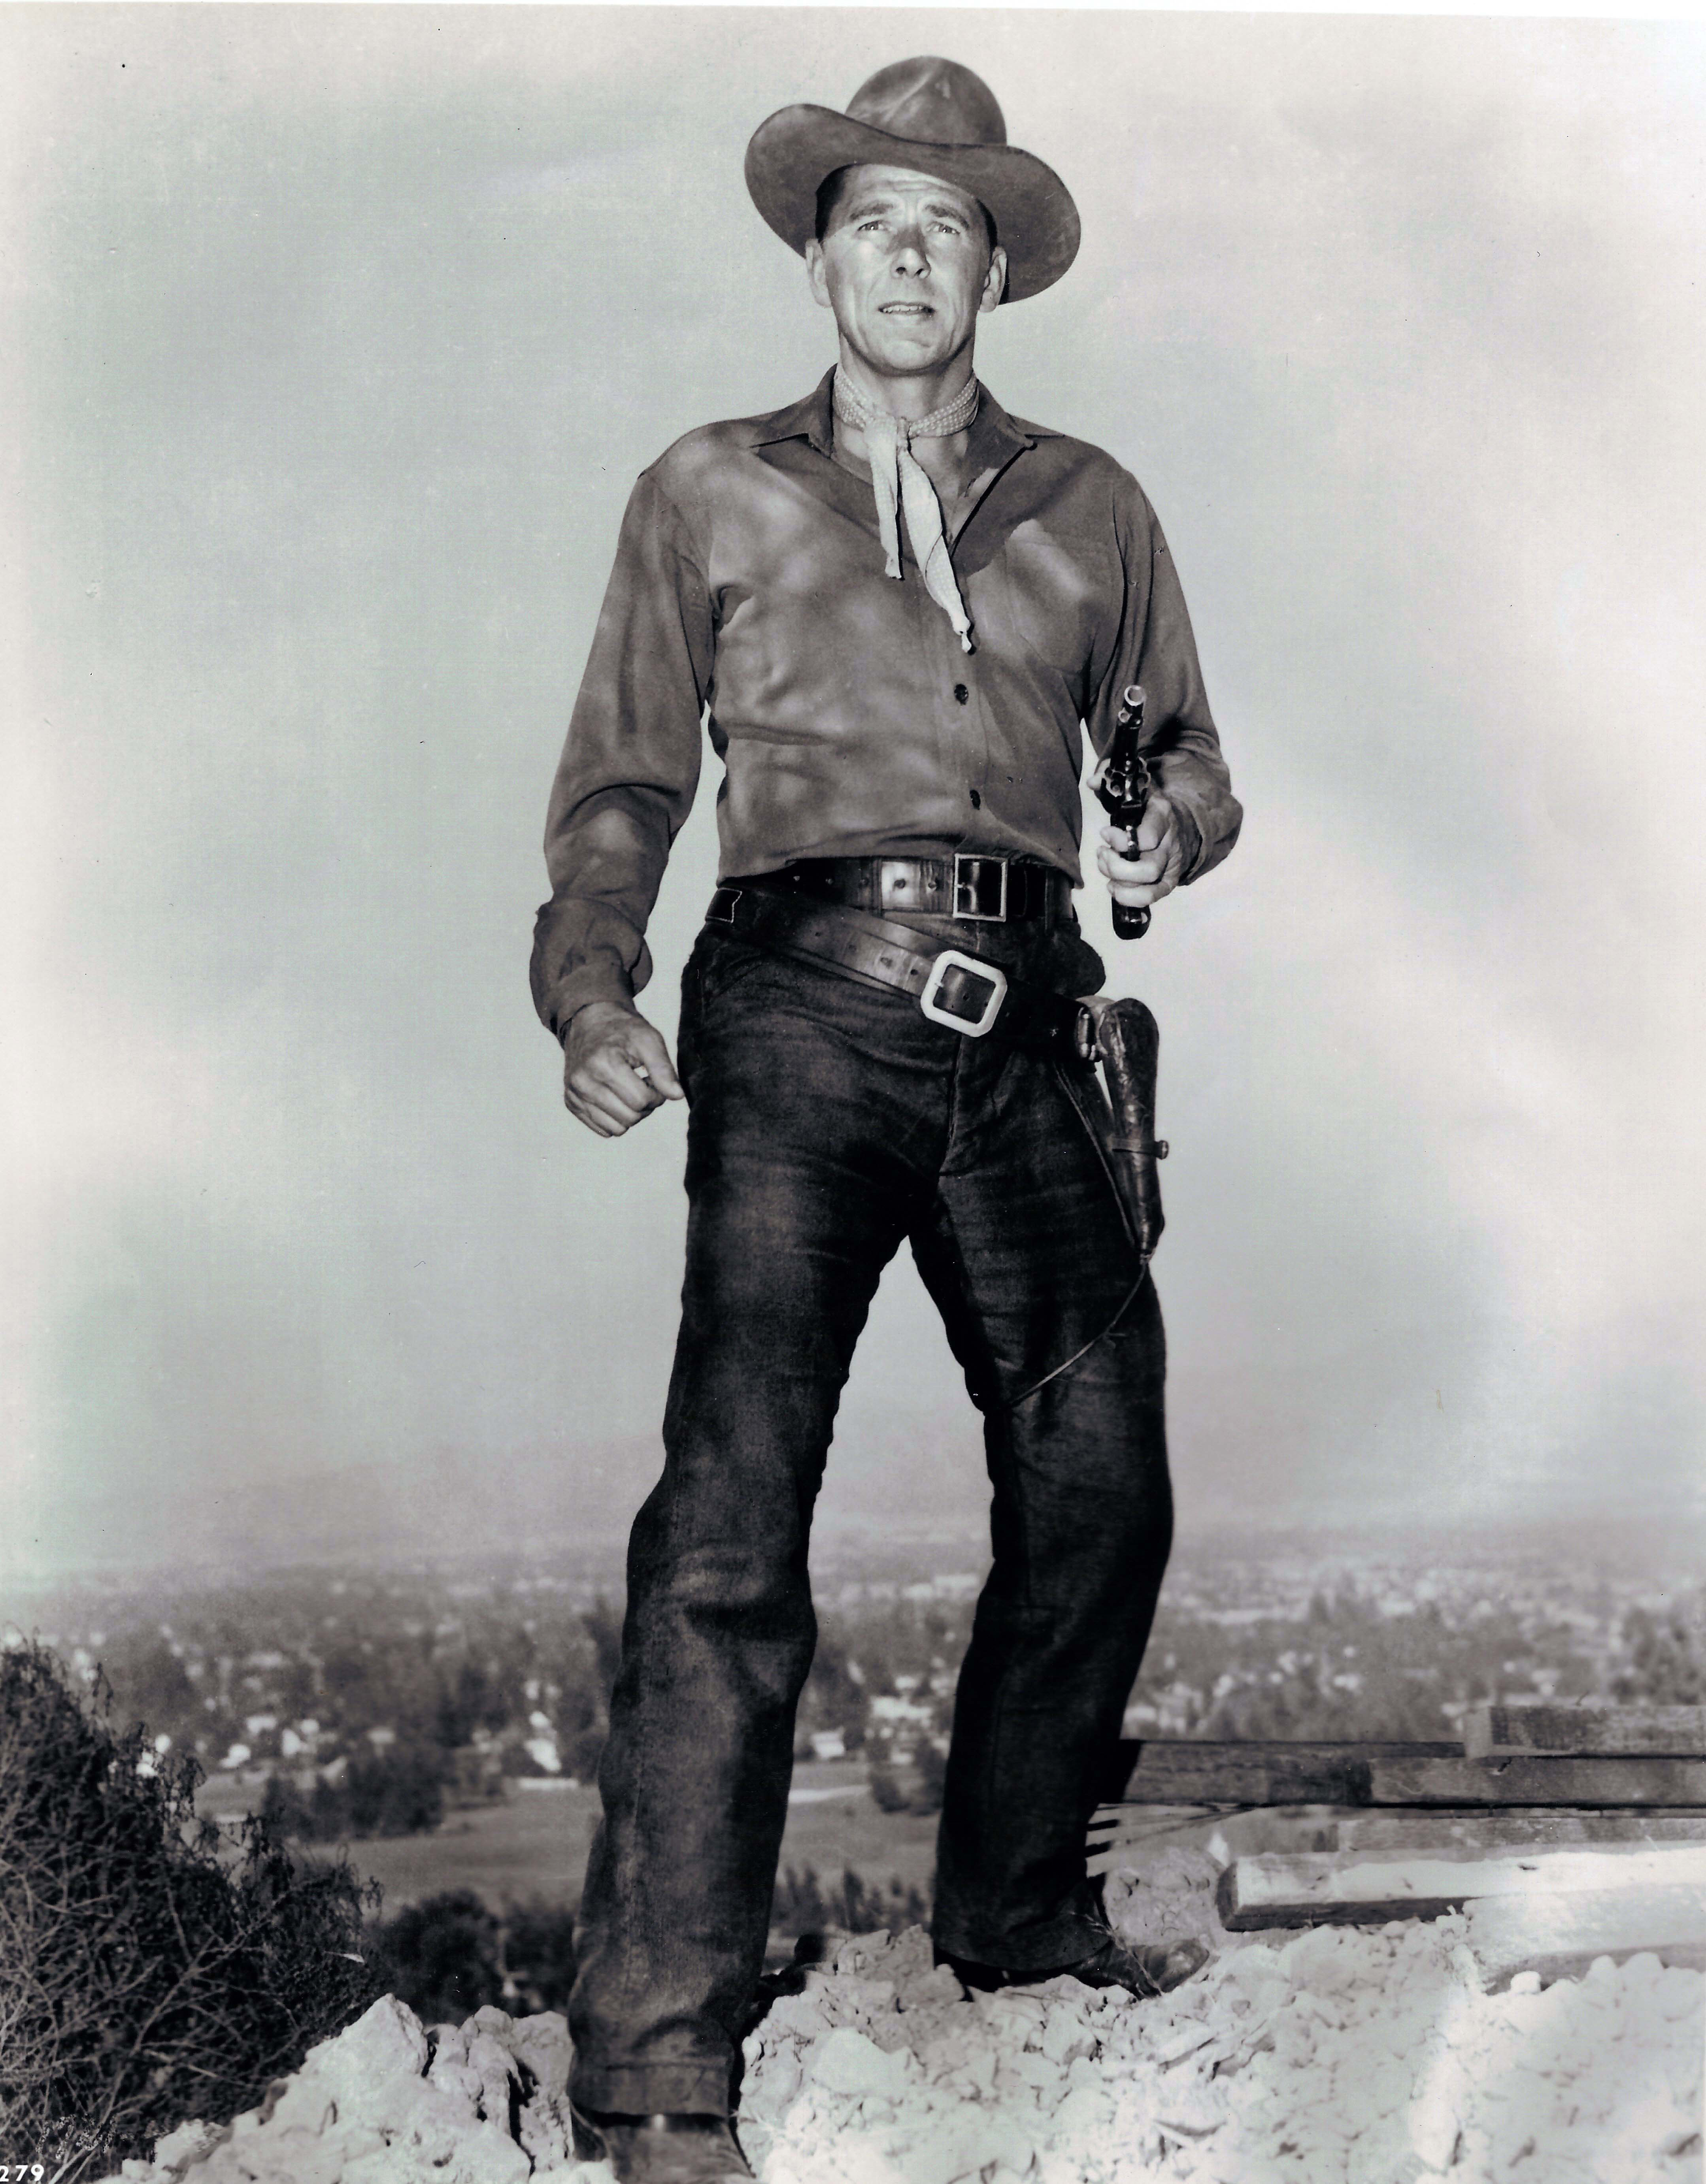 Ronald Reagan as a cowboy holding gun 9still for movie “Law and Order?”)